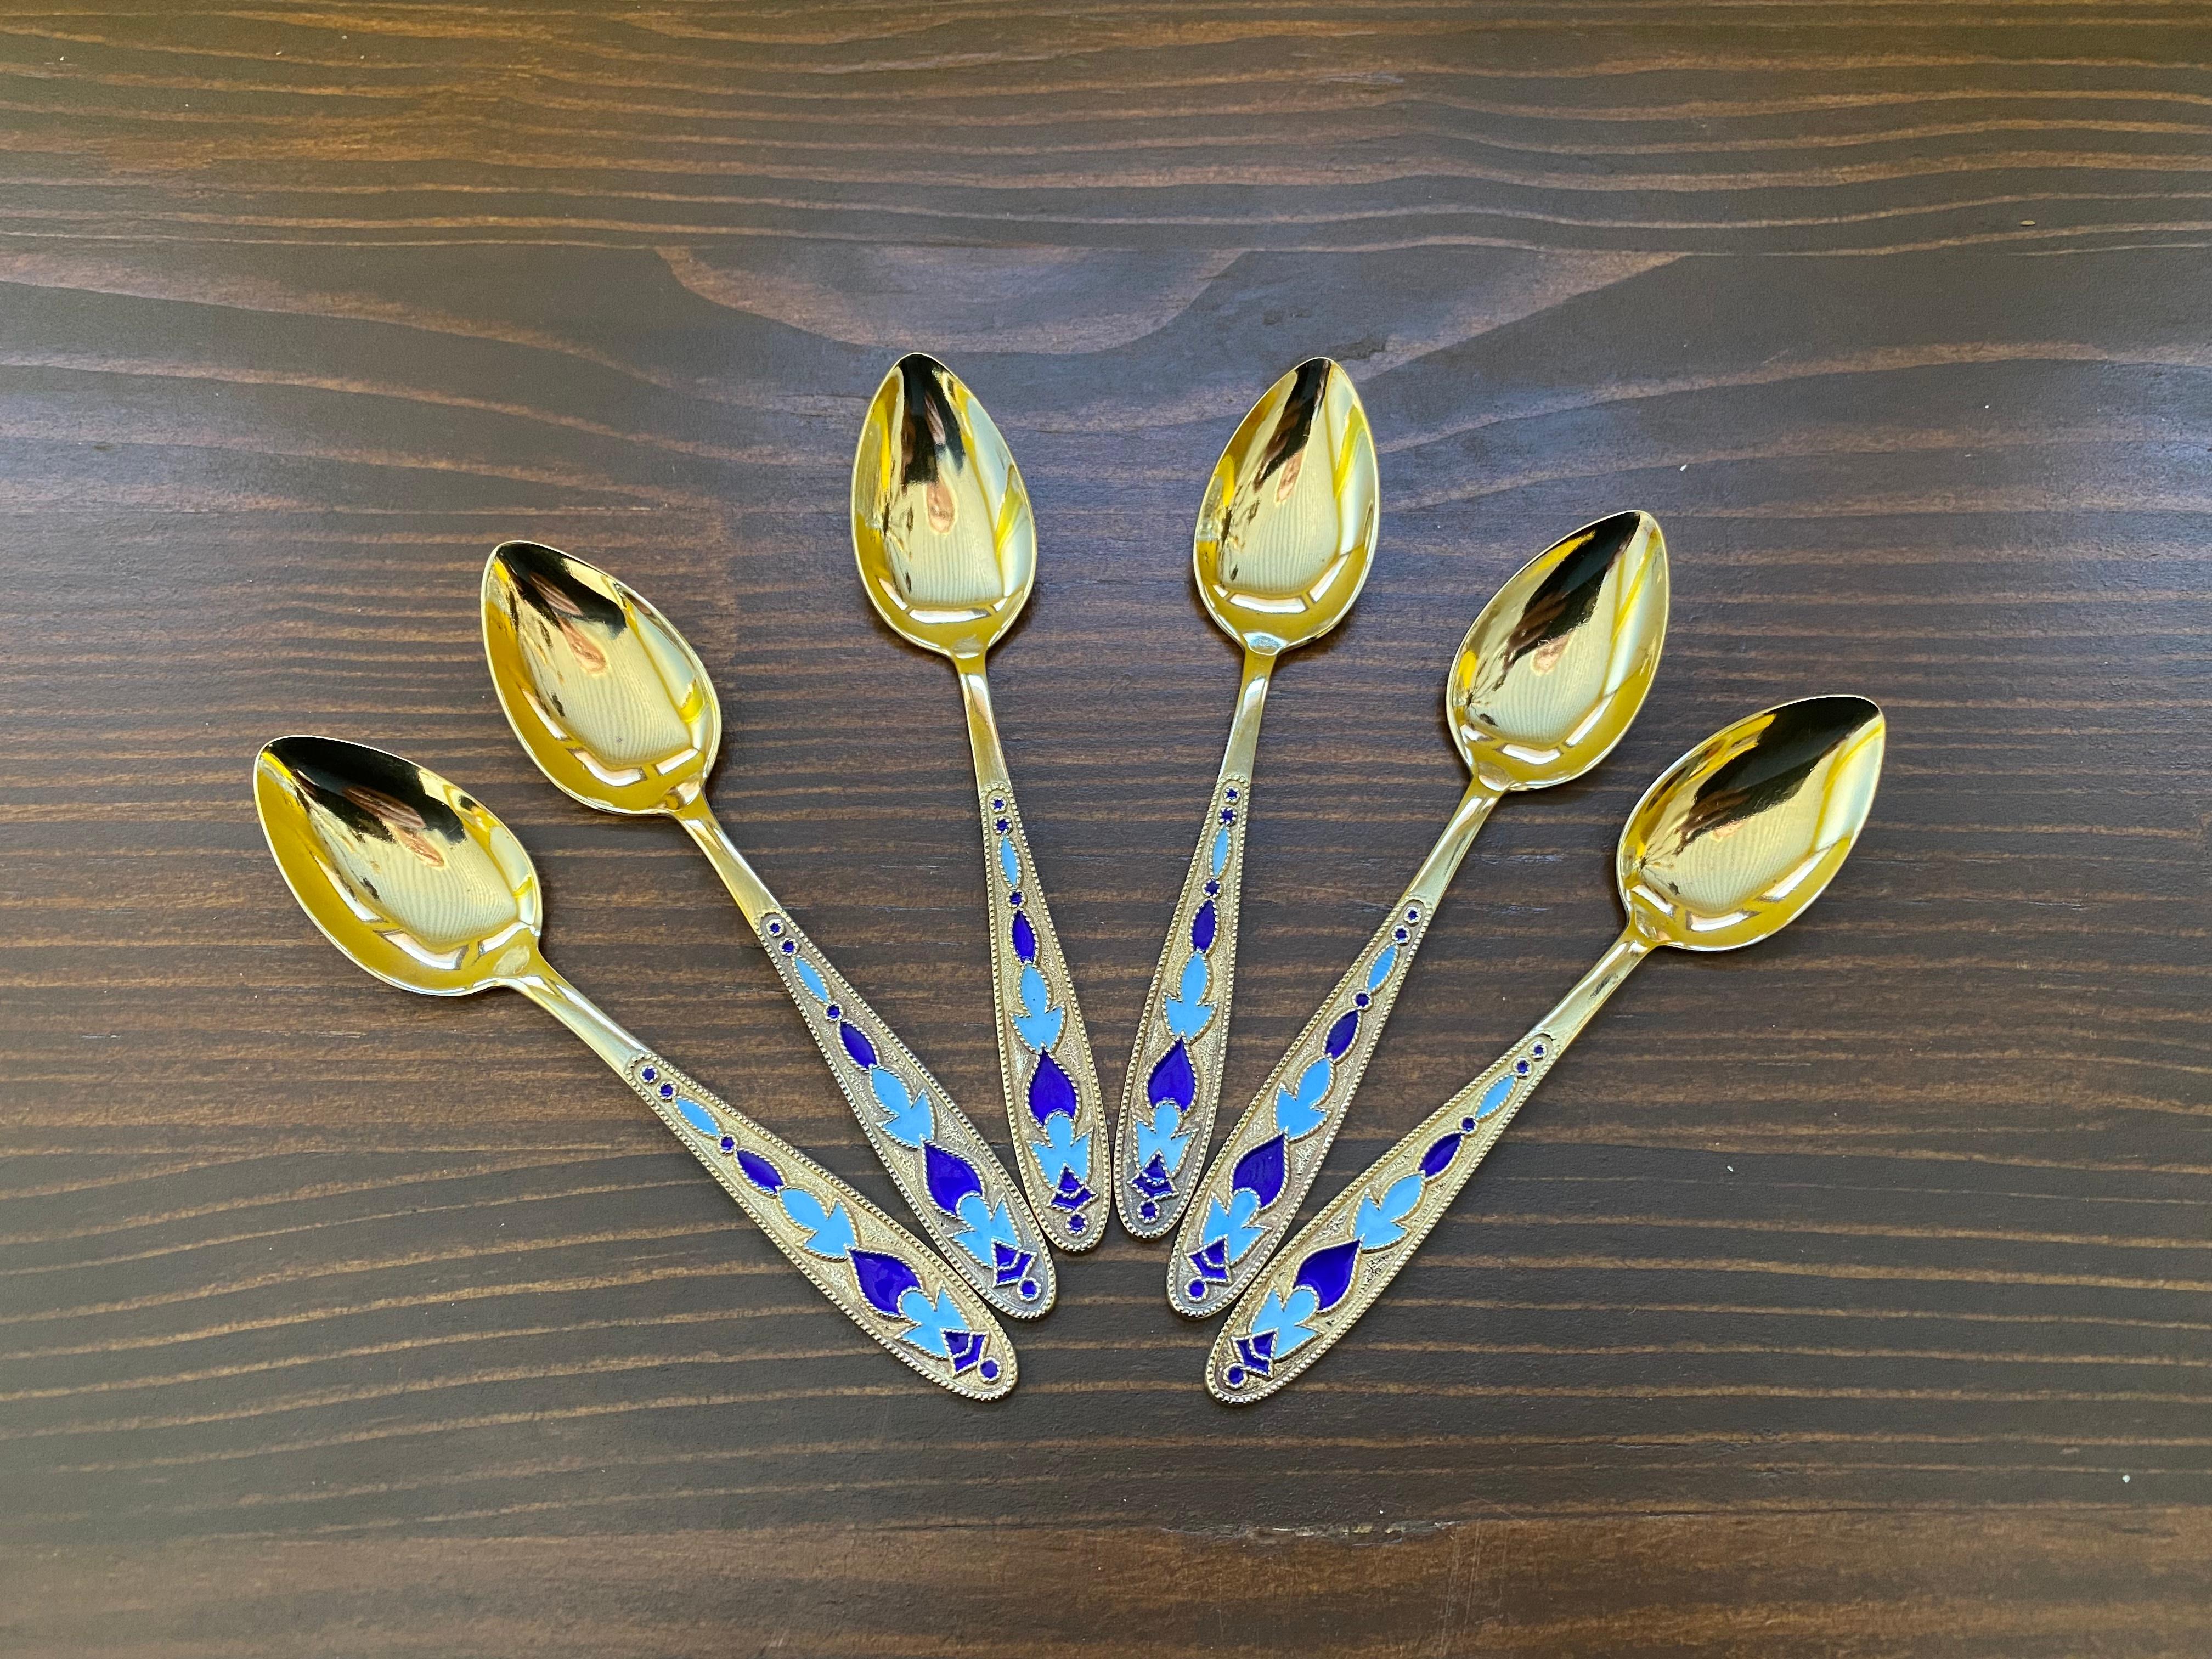 Set of 6 Russian Enamel Spoons Fine and Rare Soviet Silver Spoons
Set of 6 Russian Enamel Spoons
Fine and Rare Soviet Silver Spoons.

These were probably made in the 1950s.
Stamp Head 875 and ? 3AHO